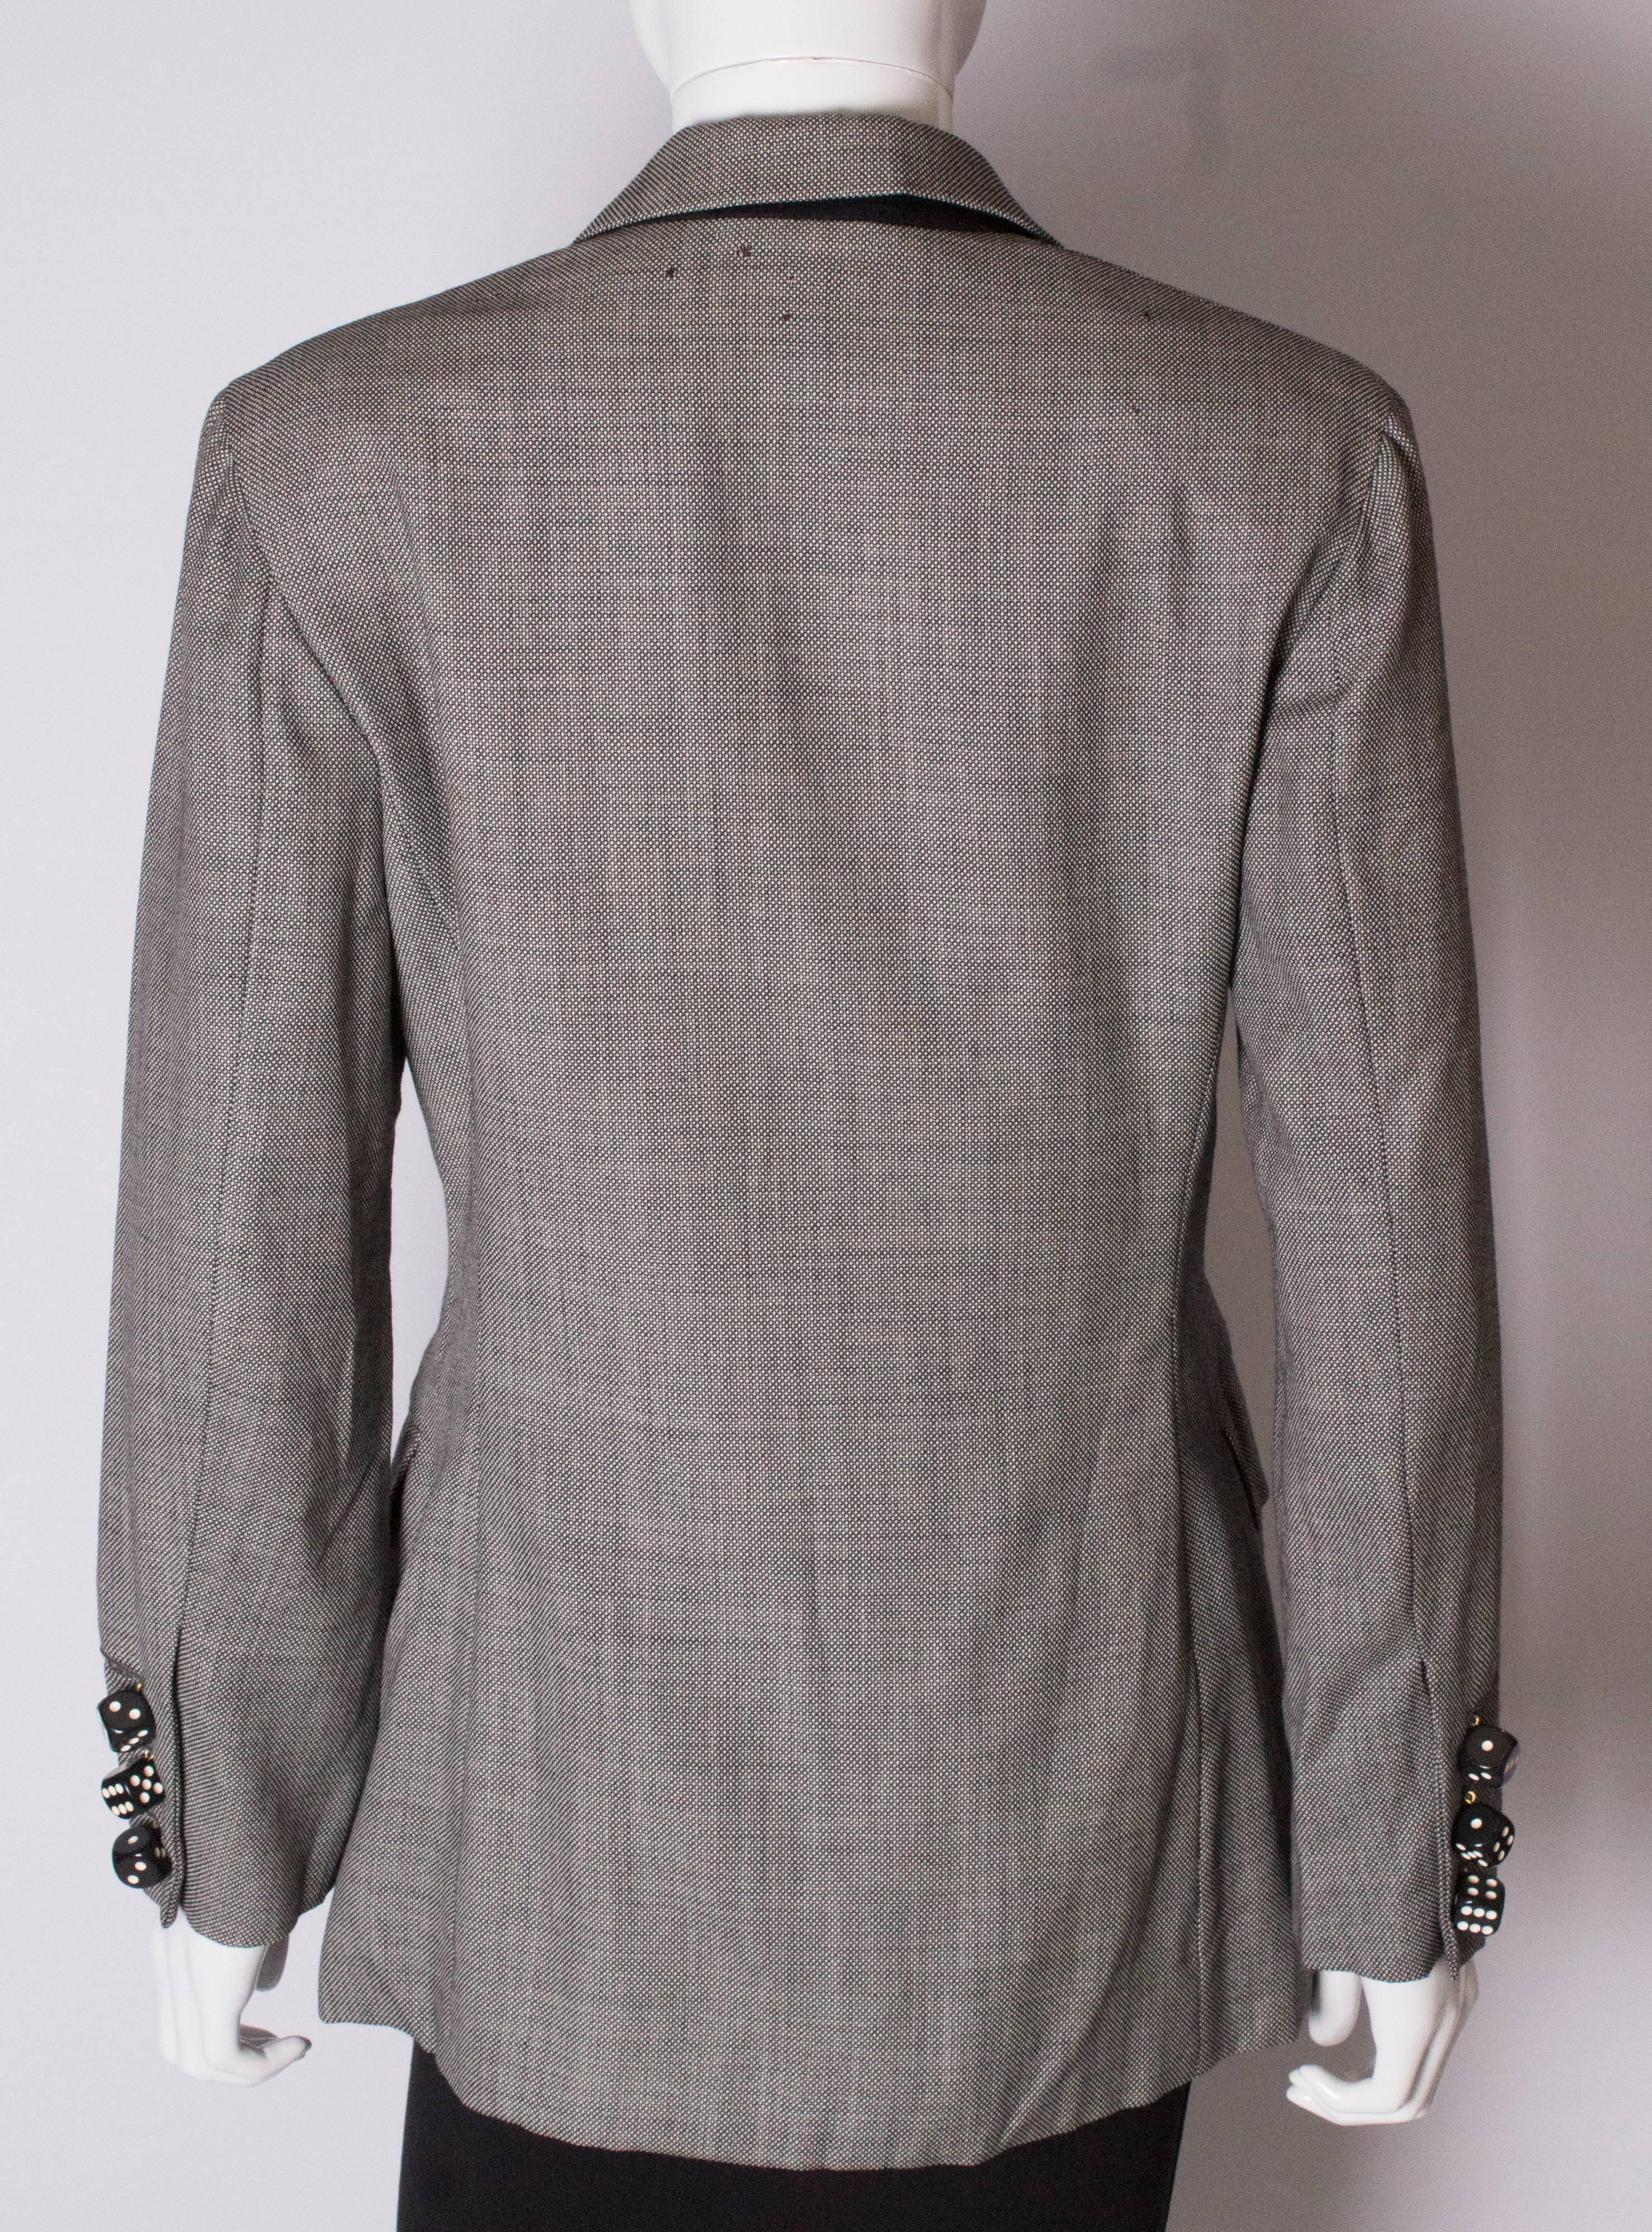 A Vintage 1990s grey button up dice button detail jacket by Moschino Couture  For Sale 4